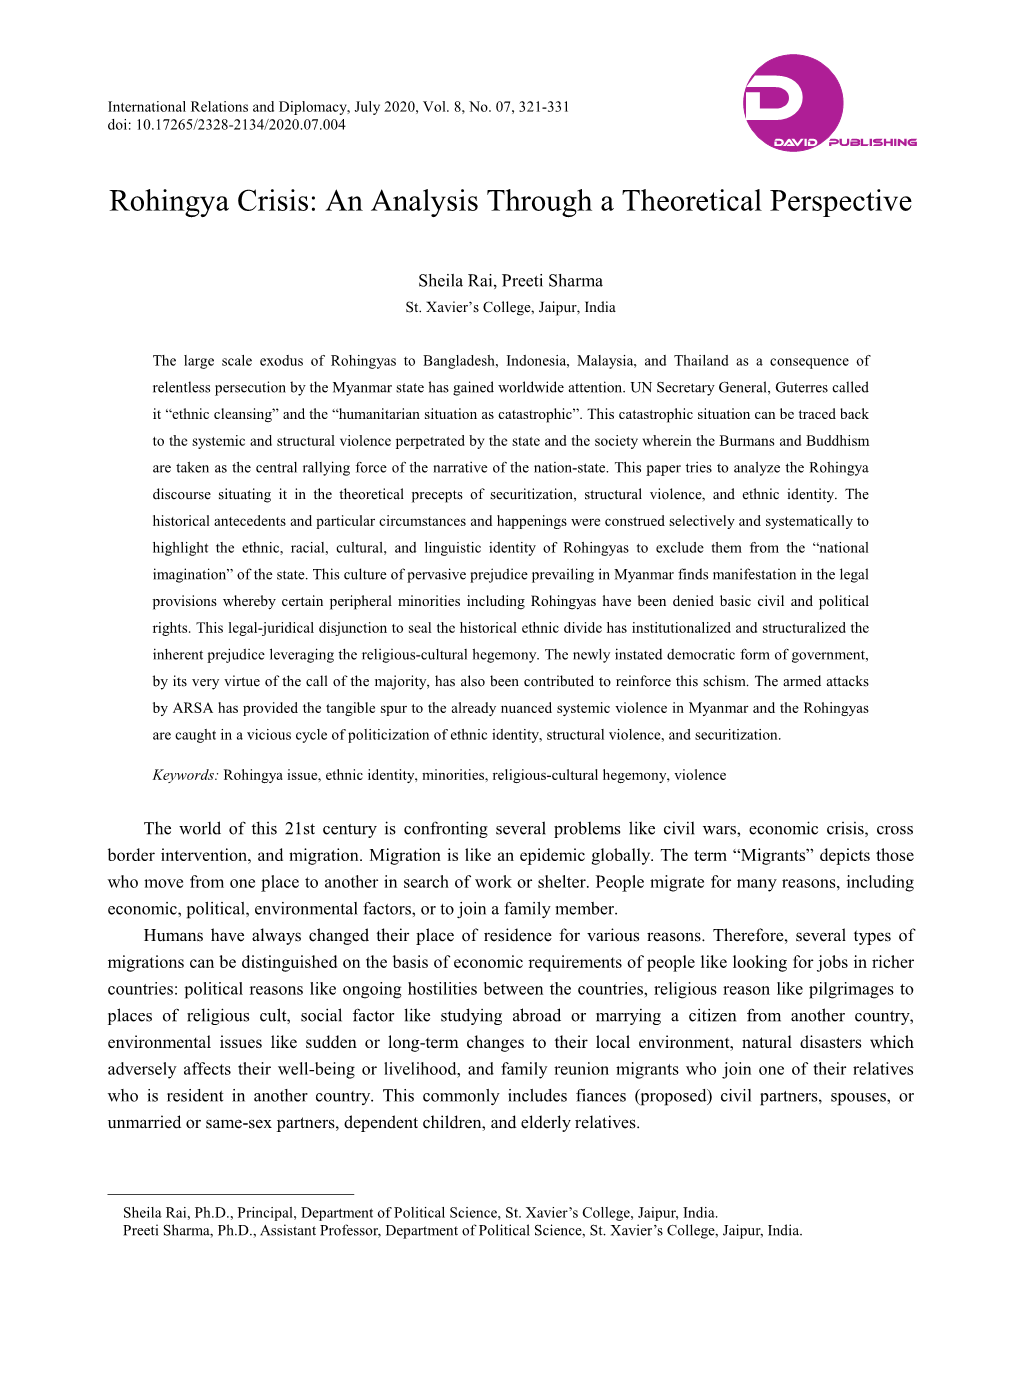 Rohingya Crisis: an Analysis Through a Theoretical Perspective